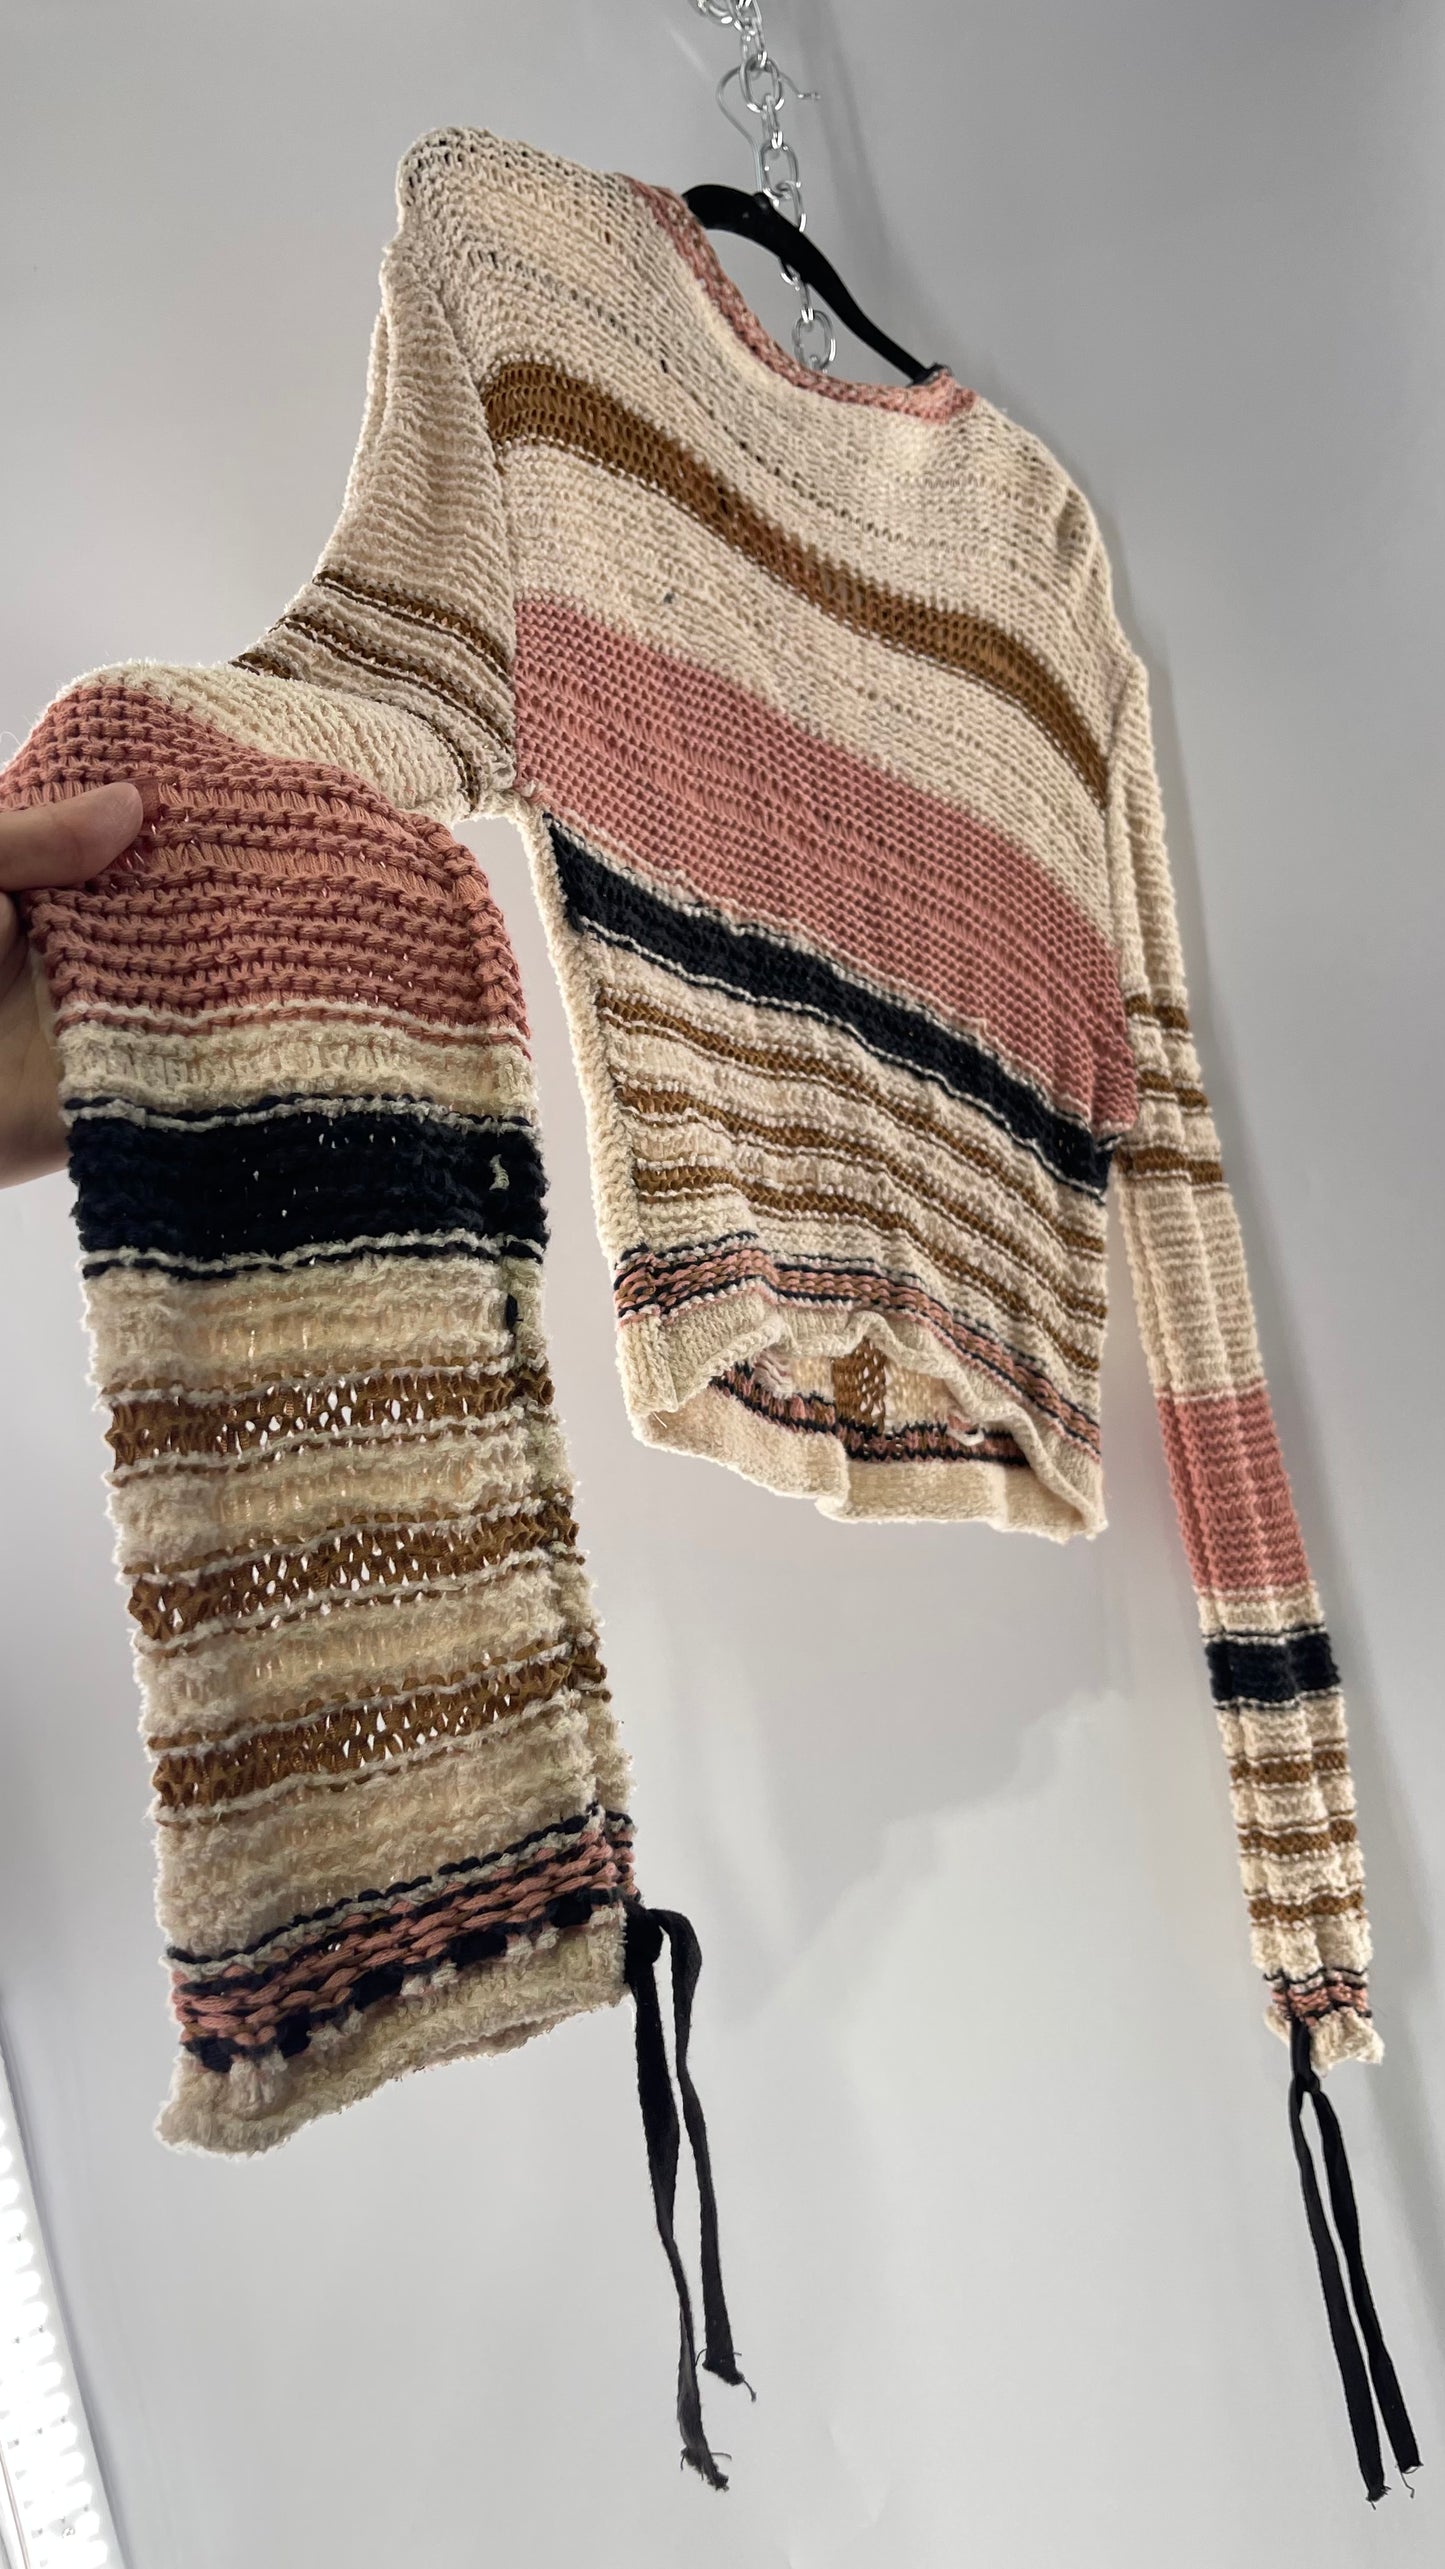 Free People Beige Slouchy Sweater with Dusty Pink, Tan and Black Striping Detail (Medium)